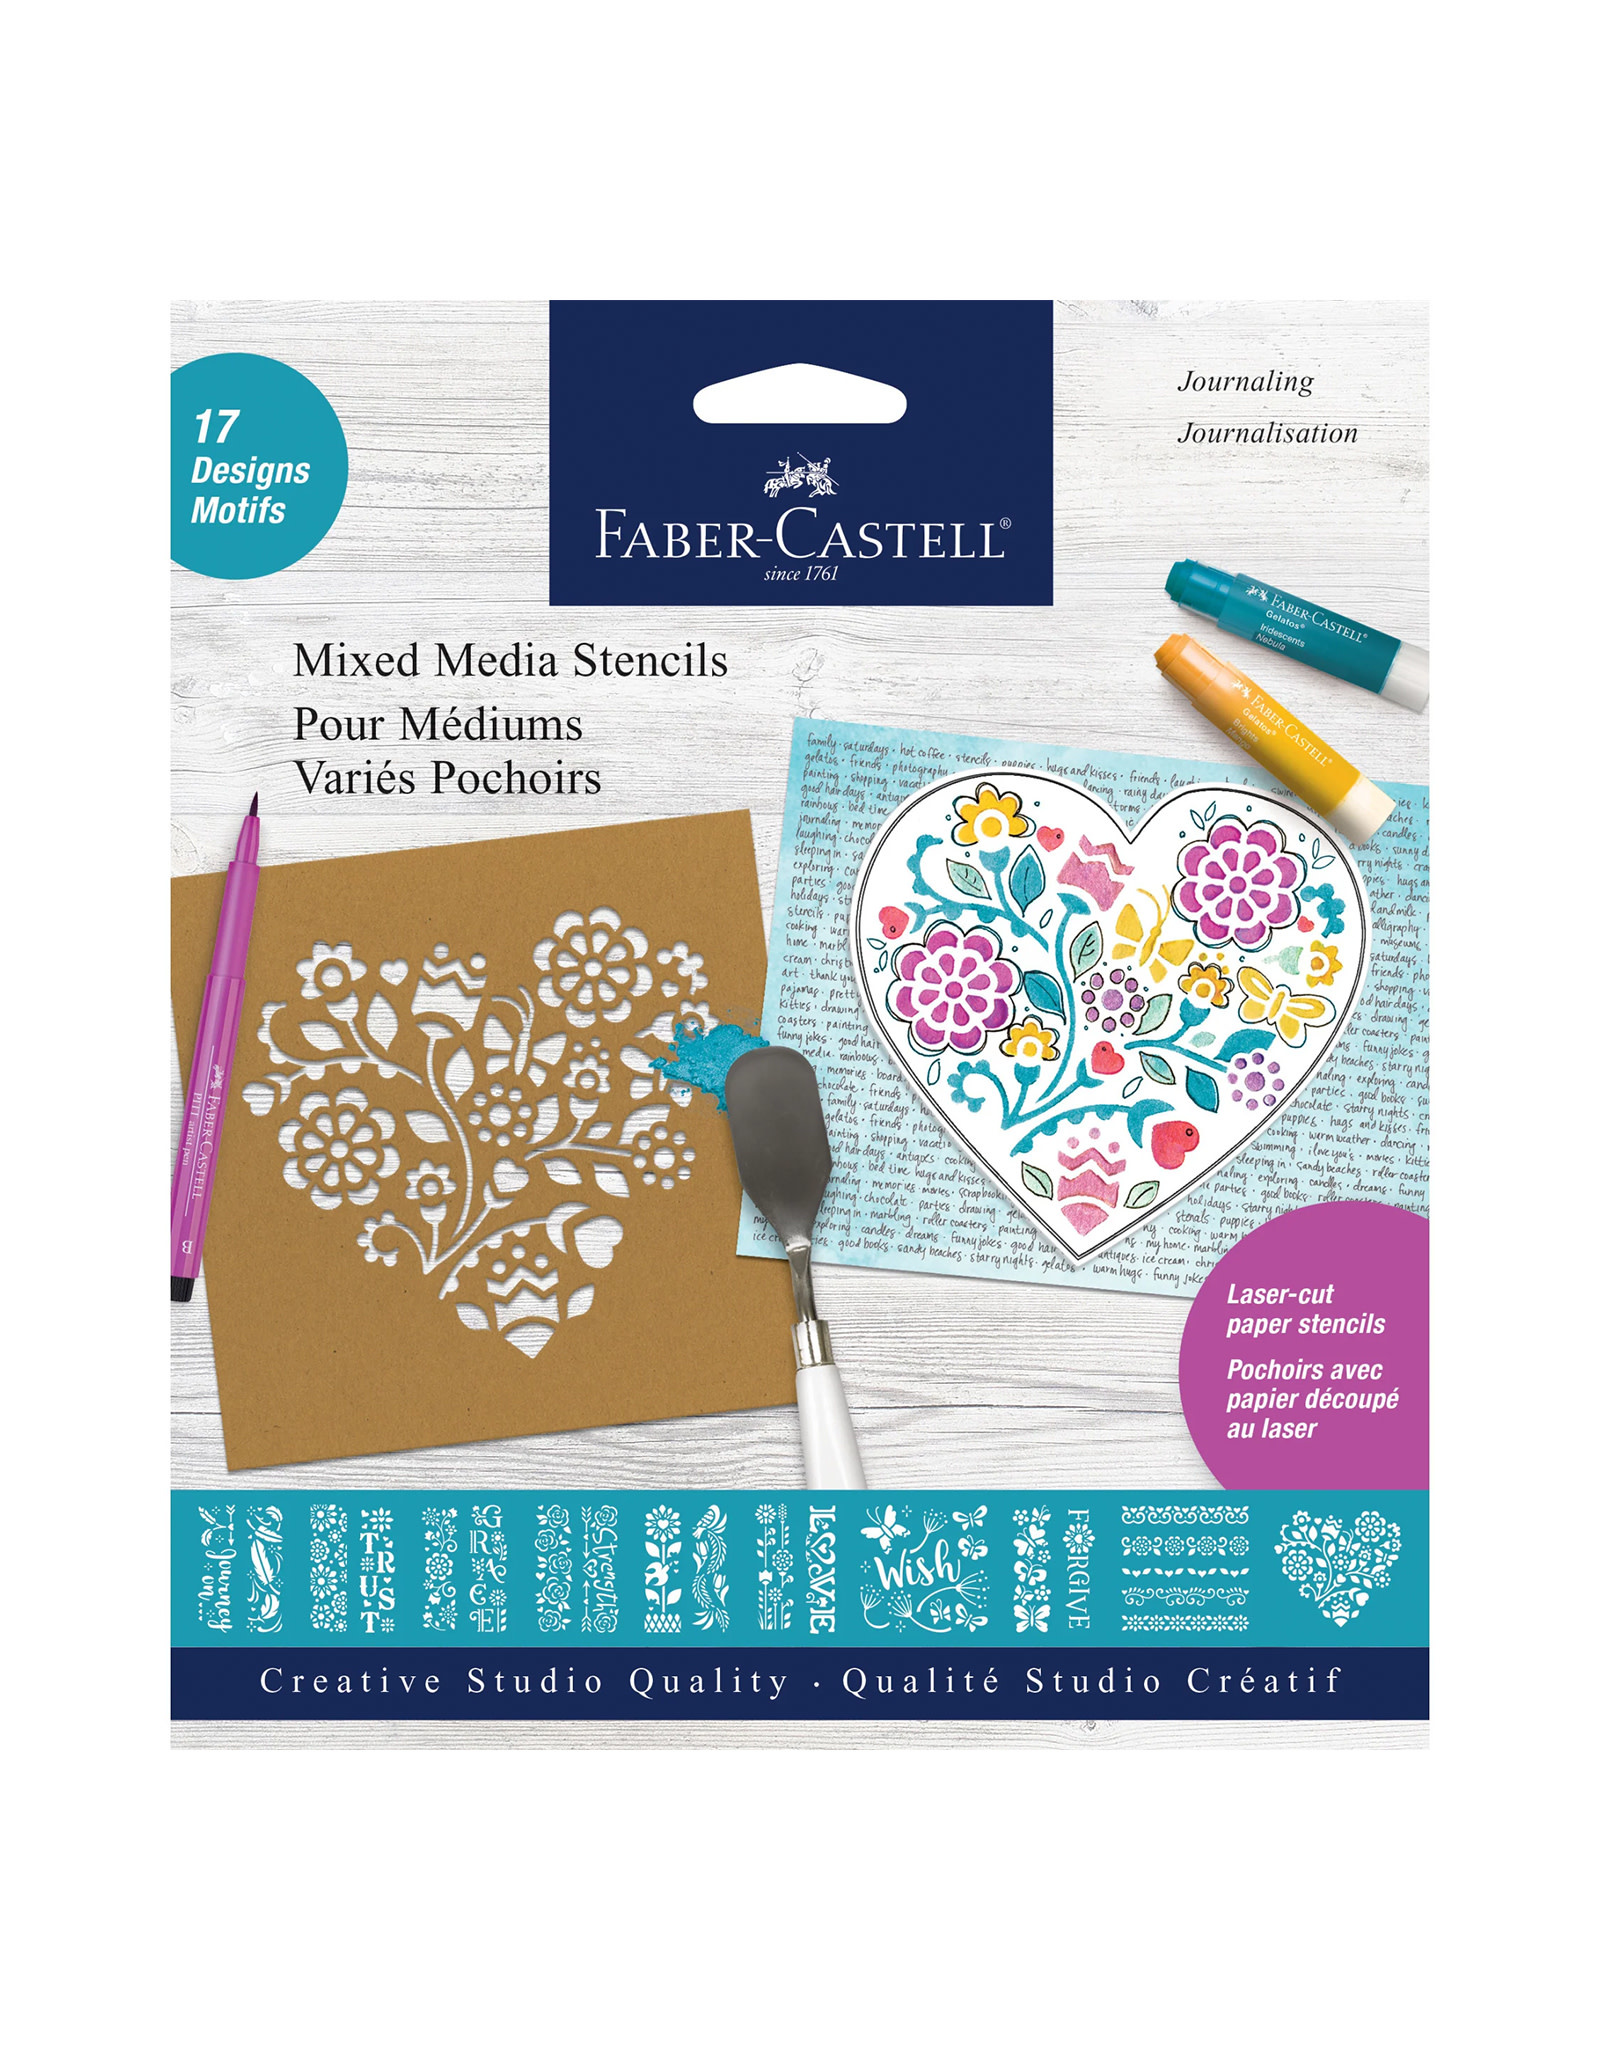 Faber Castell Mixed Media Stencils, Journaling - The Art Store/Commercial Art Supply